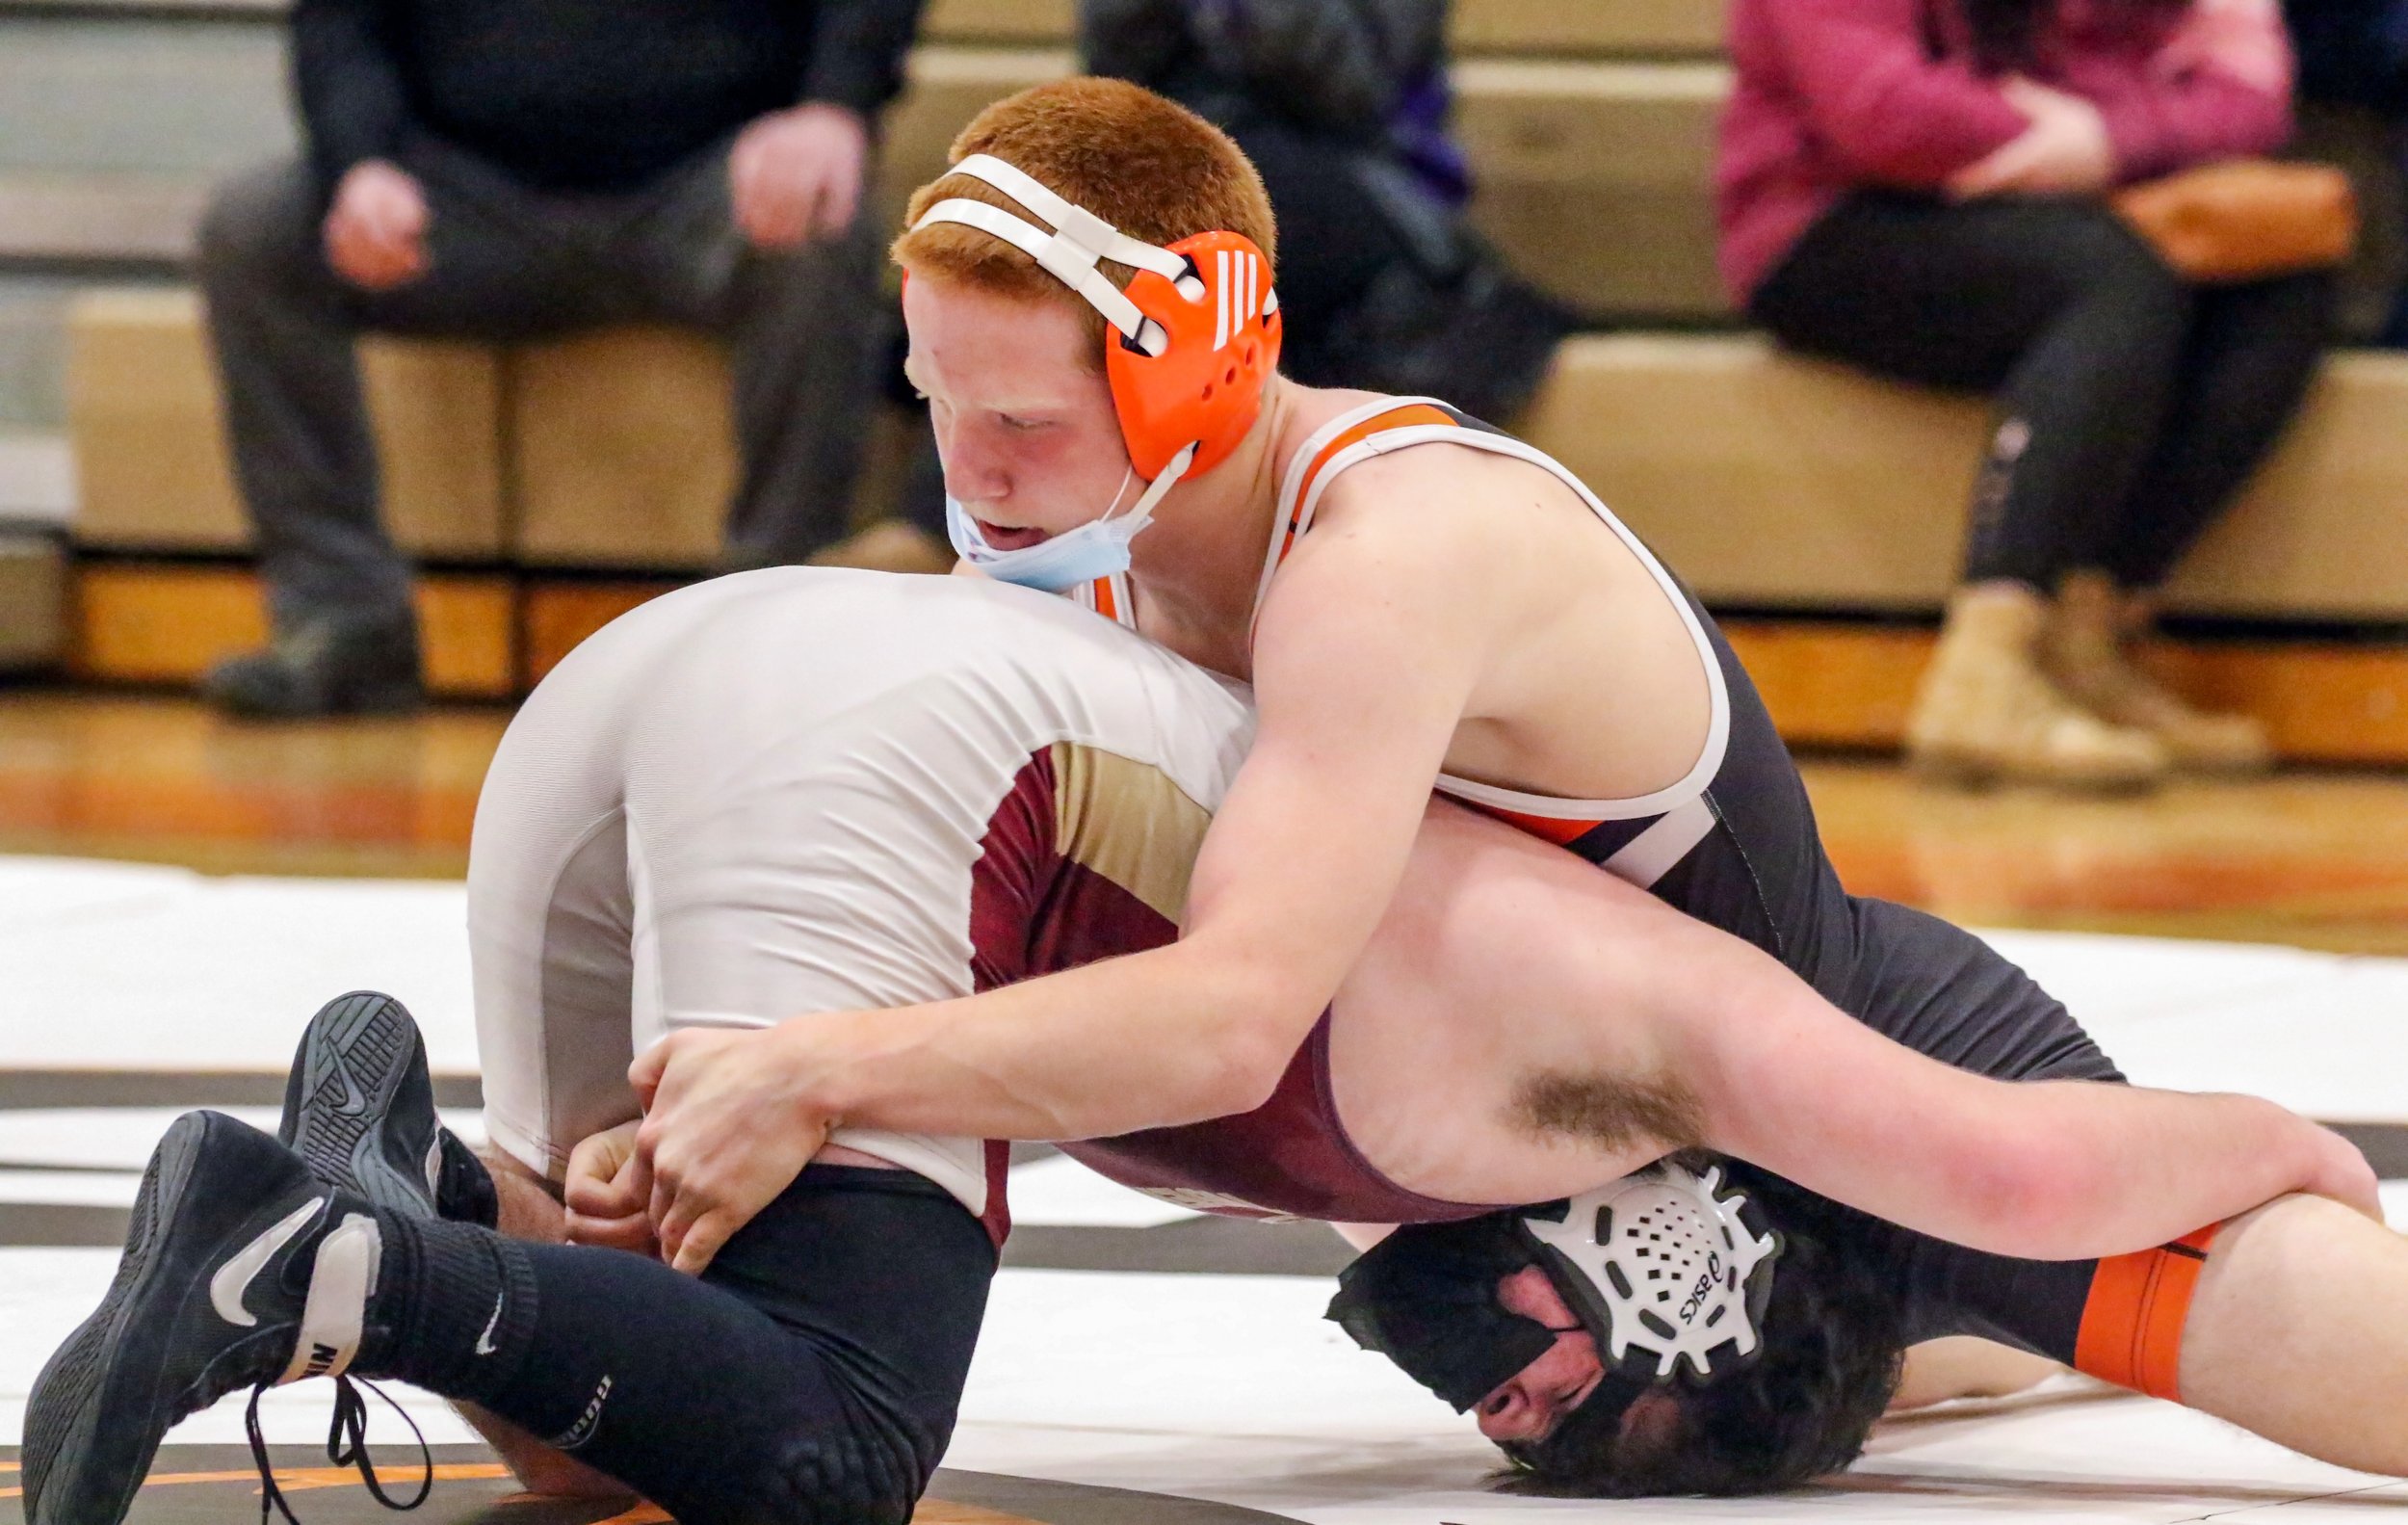  Wellsville’s Cole Hadfield, top, grapples with his opponent during his bout at 145 pounds in Tuesday night’s home match against Avoca/Prattsburgh/Hammondsport. [Chris Brooks/WellsvilleSports.com] 